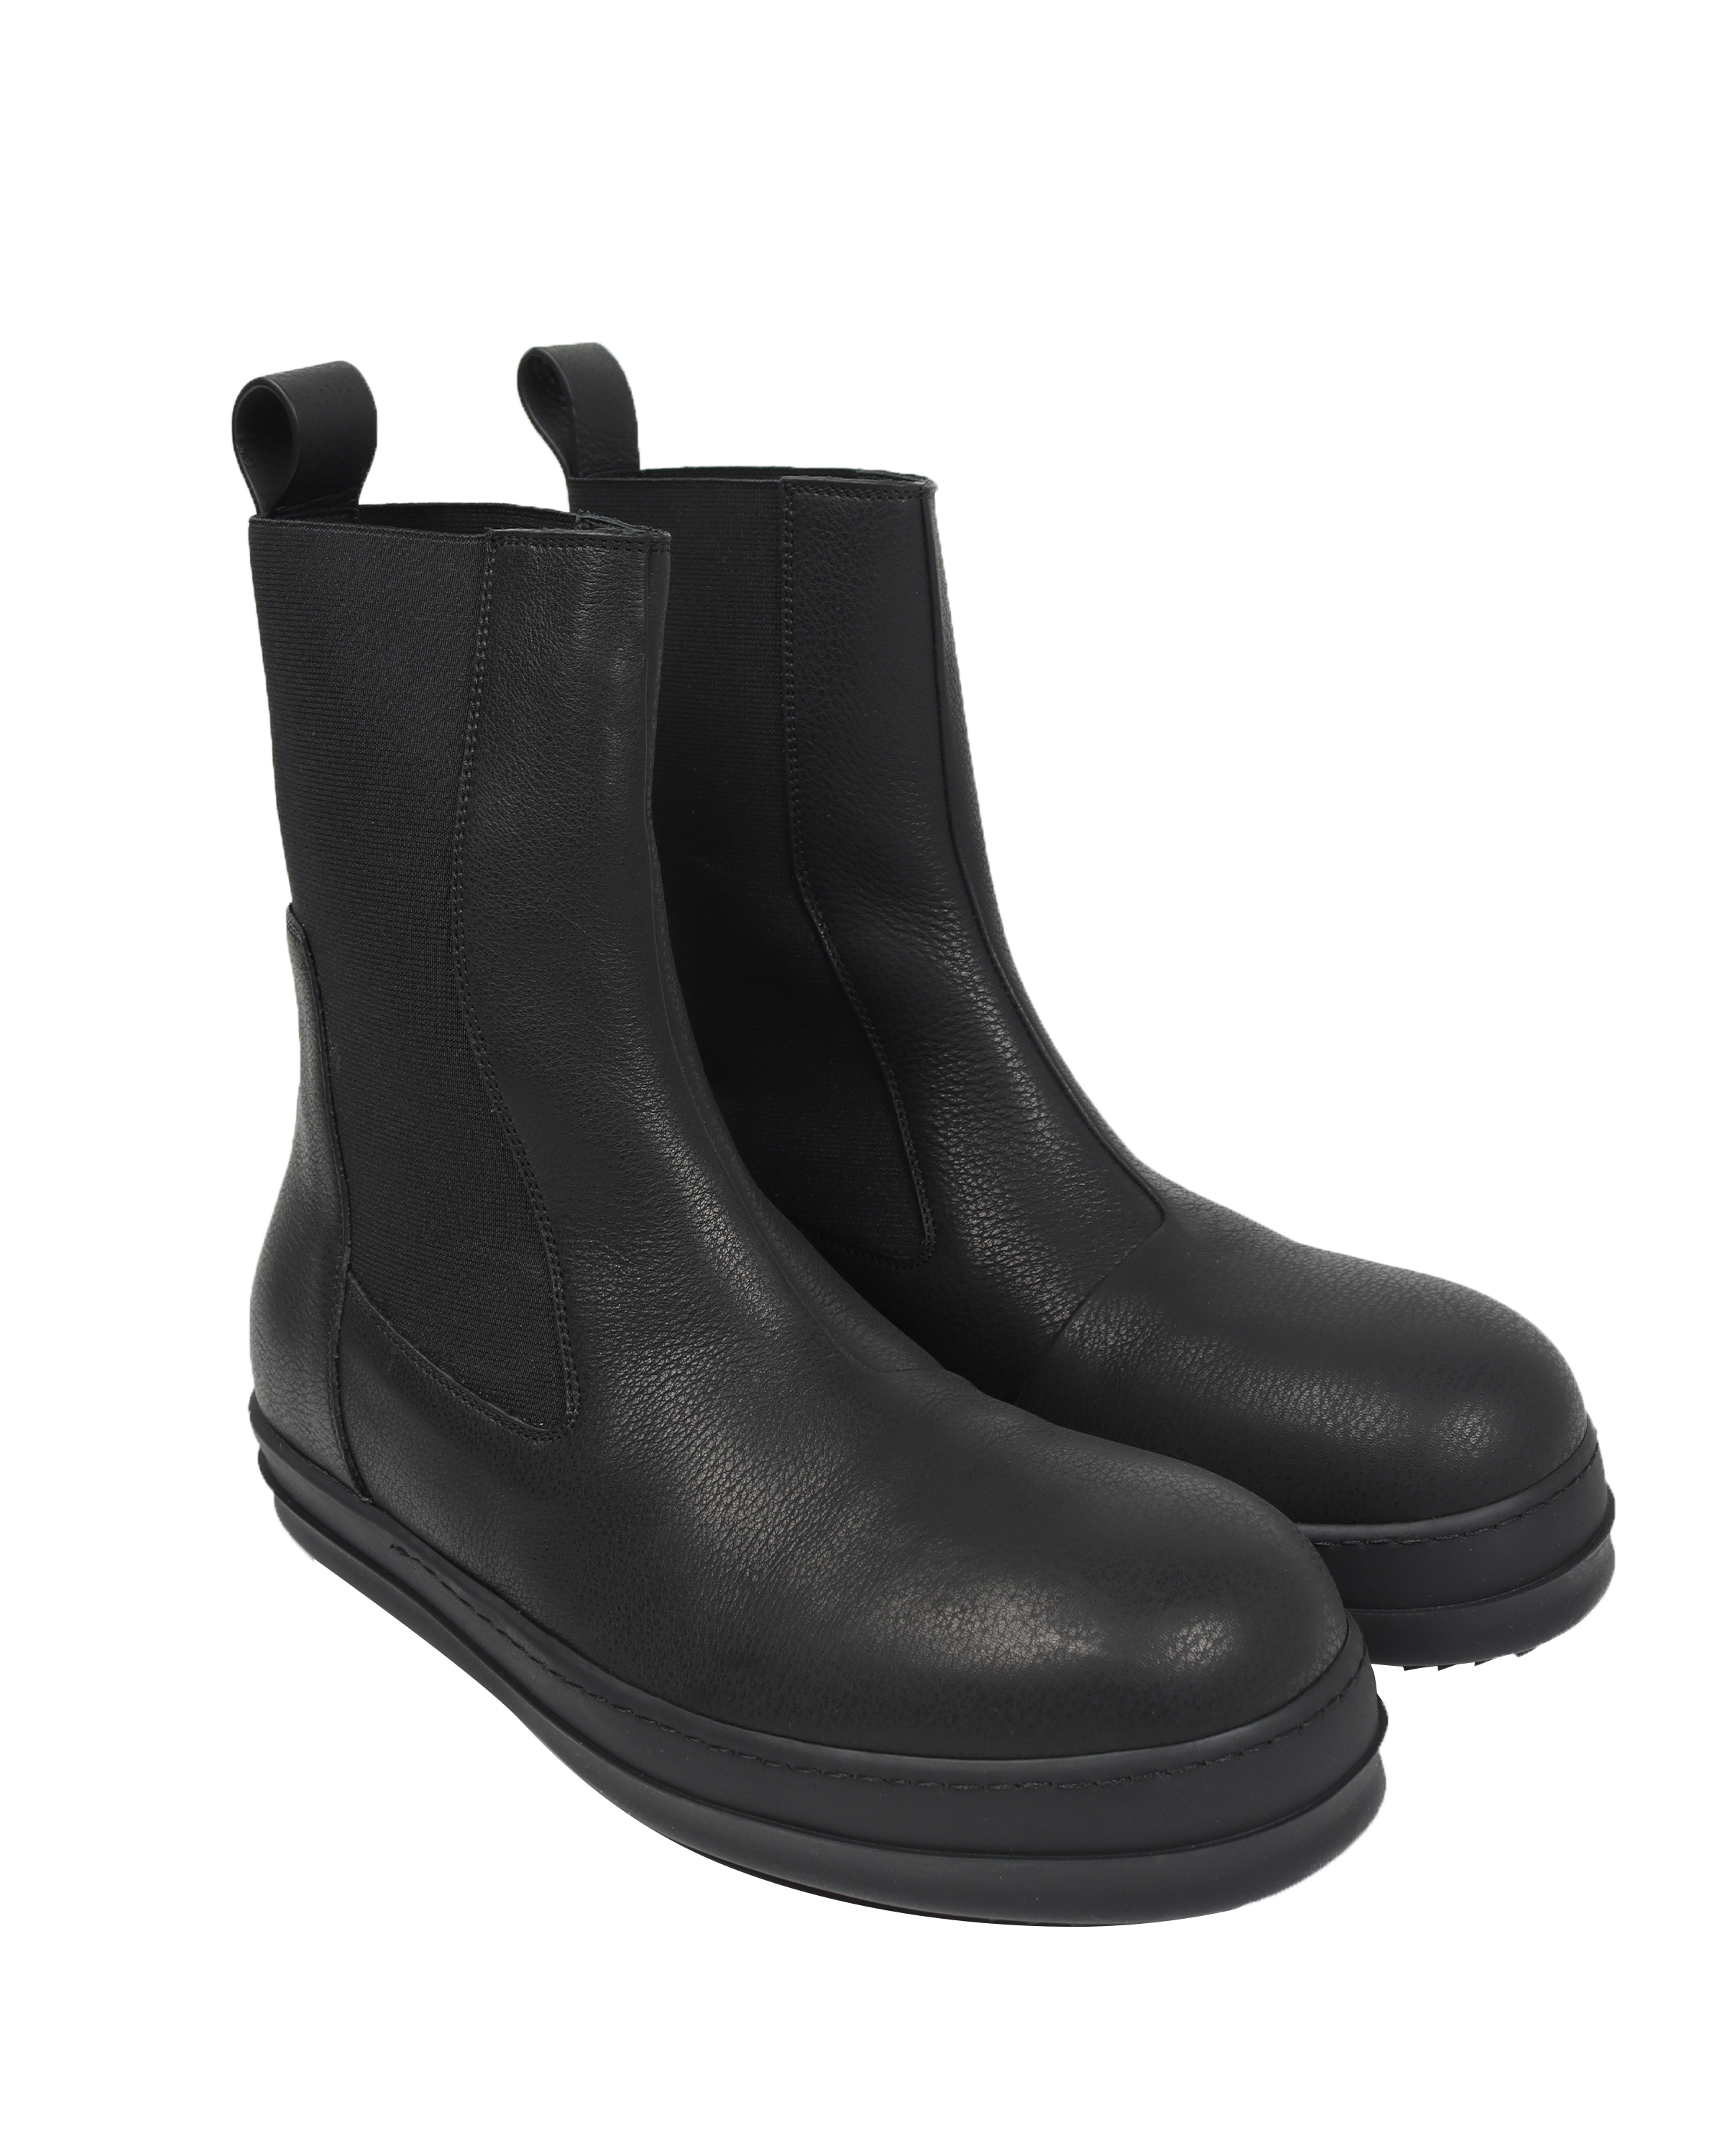 "BOZO" Leather Chelsea Boot